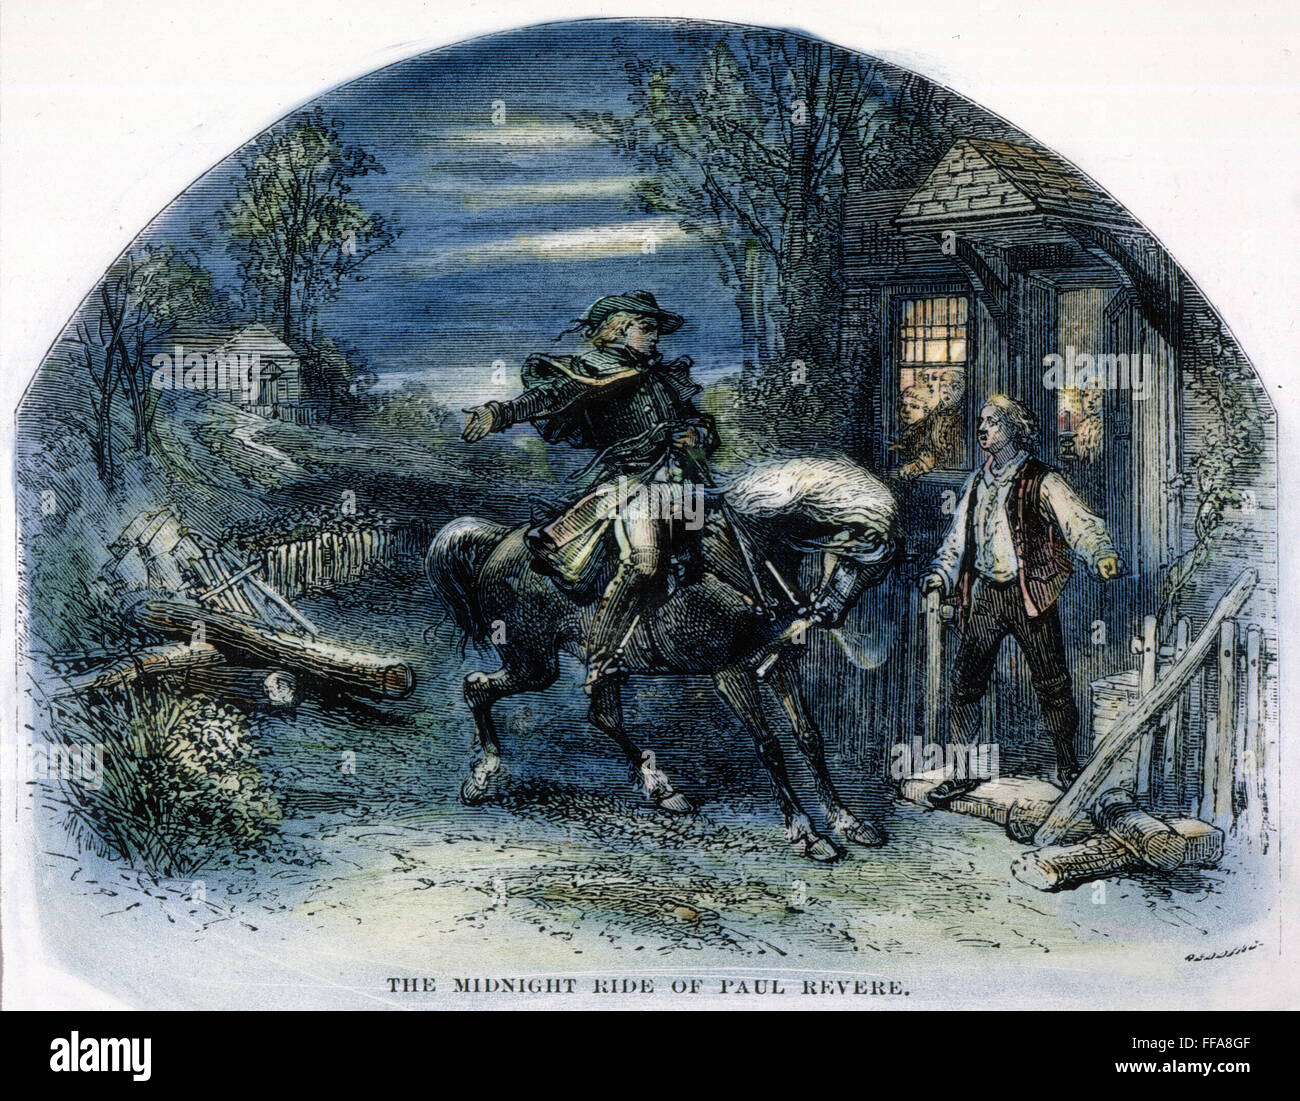 PAUL REVERE'S RIDE, 1775. /nFrom Boston to Lexington on April 18, 1775: colored engraving, 19th century. Stock Photo